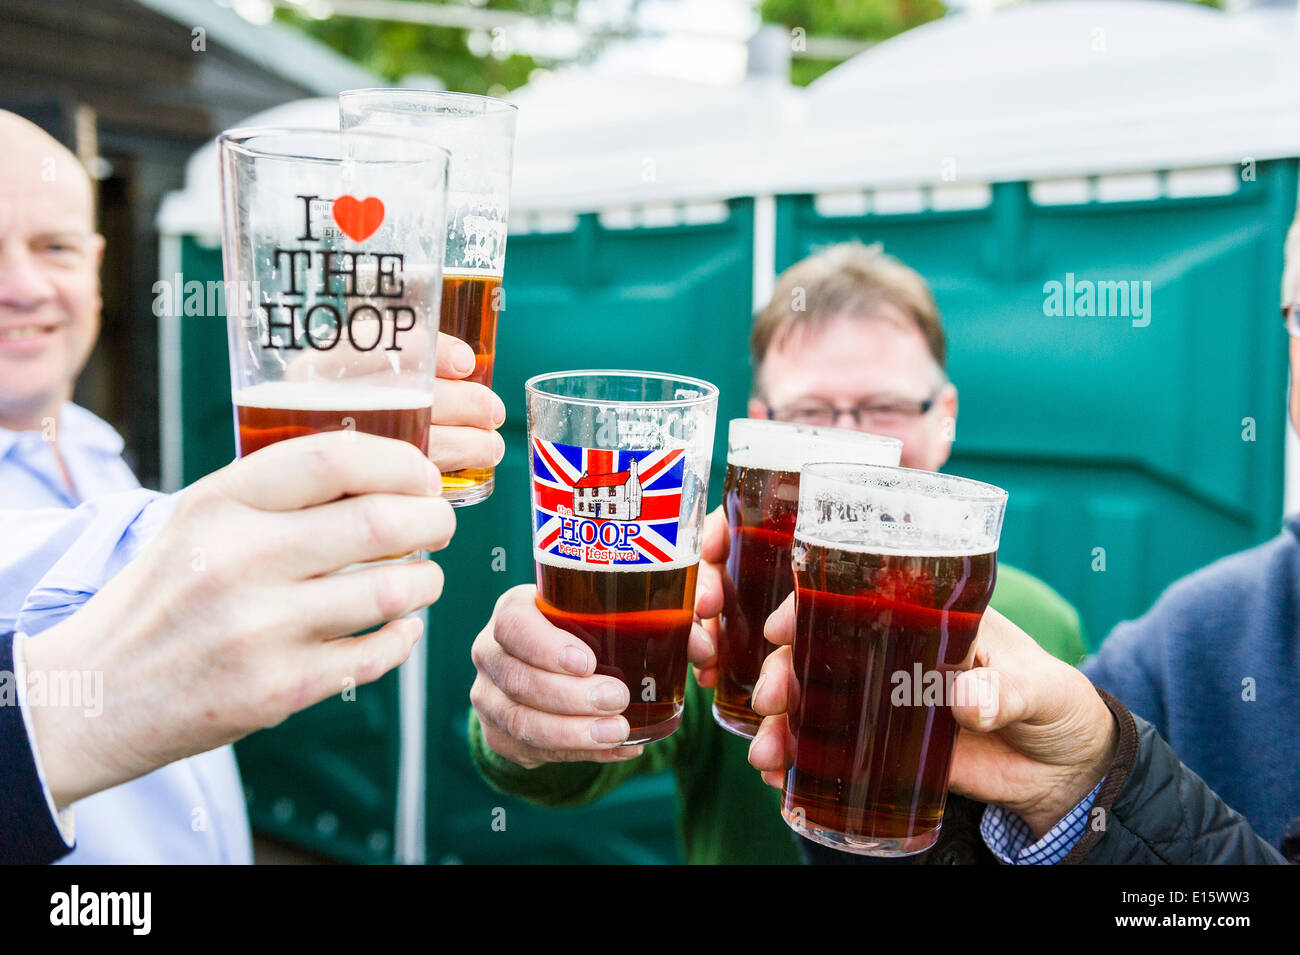 Stock, Essex. 23rd May, 2014.  Real ale fans celebrate the opening day of THE HOOP BEER FESTIVAL, Essex's most famous pub beer festival.  Over the past twenty years, the Hoop beer festival in Stock Village has become an annual event, drawing serious beer supping folk.  Photographer: Gordon Scammell/Alamy Live News Stock Photo